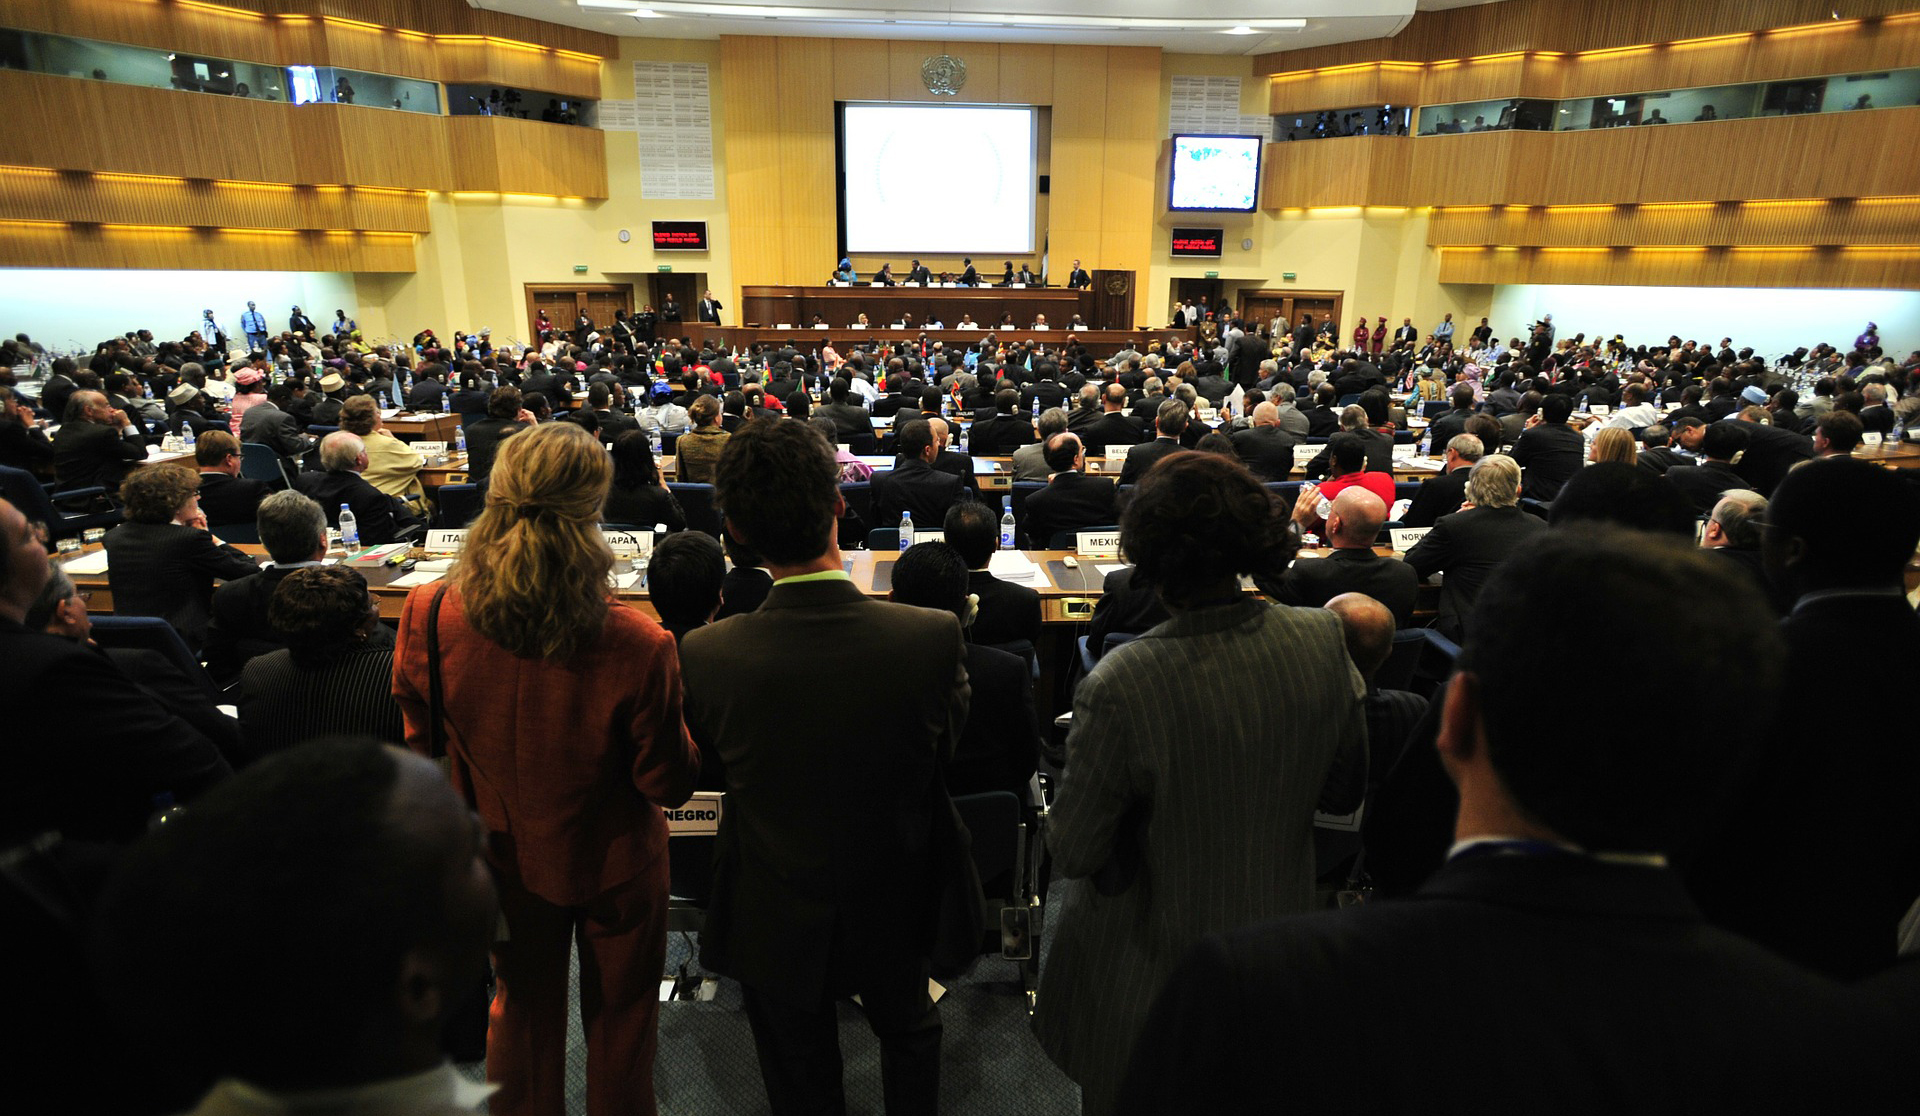 Conference hall with a lot of people